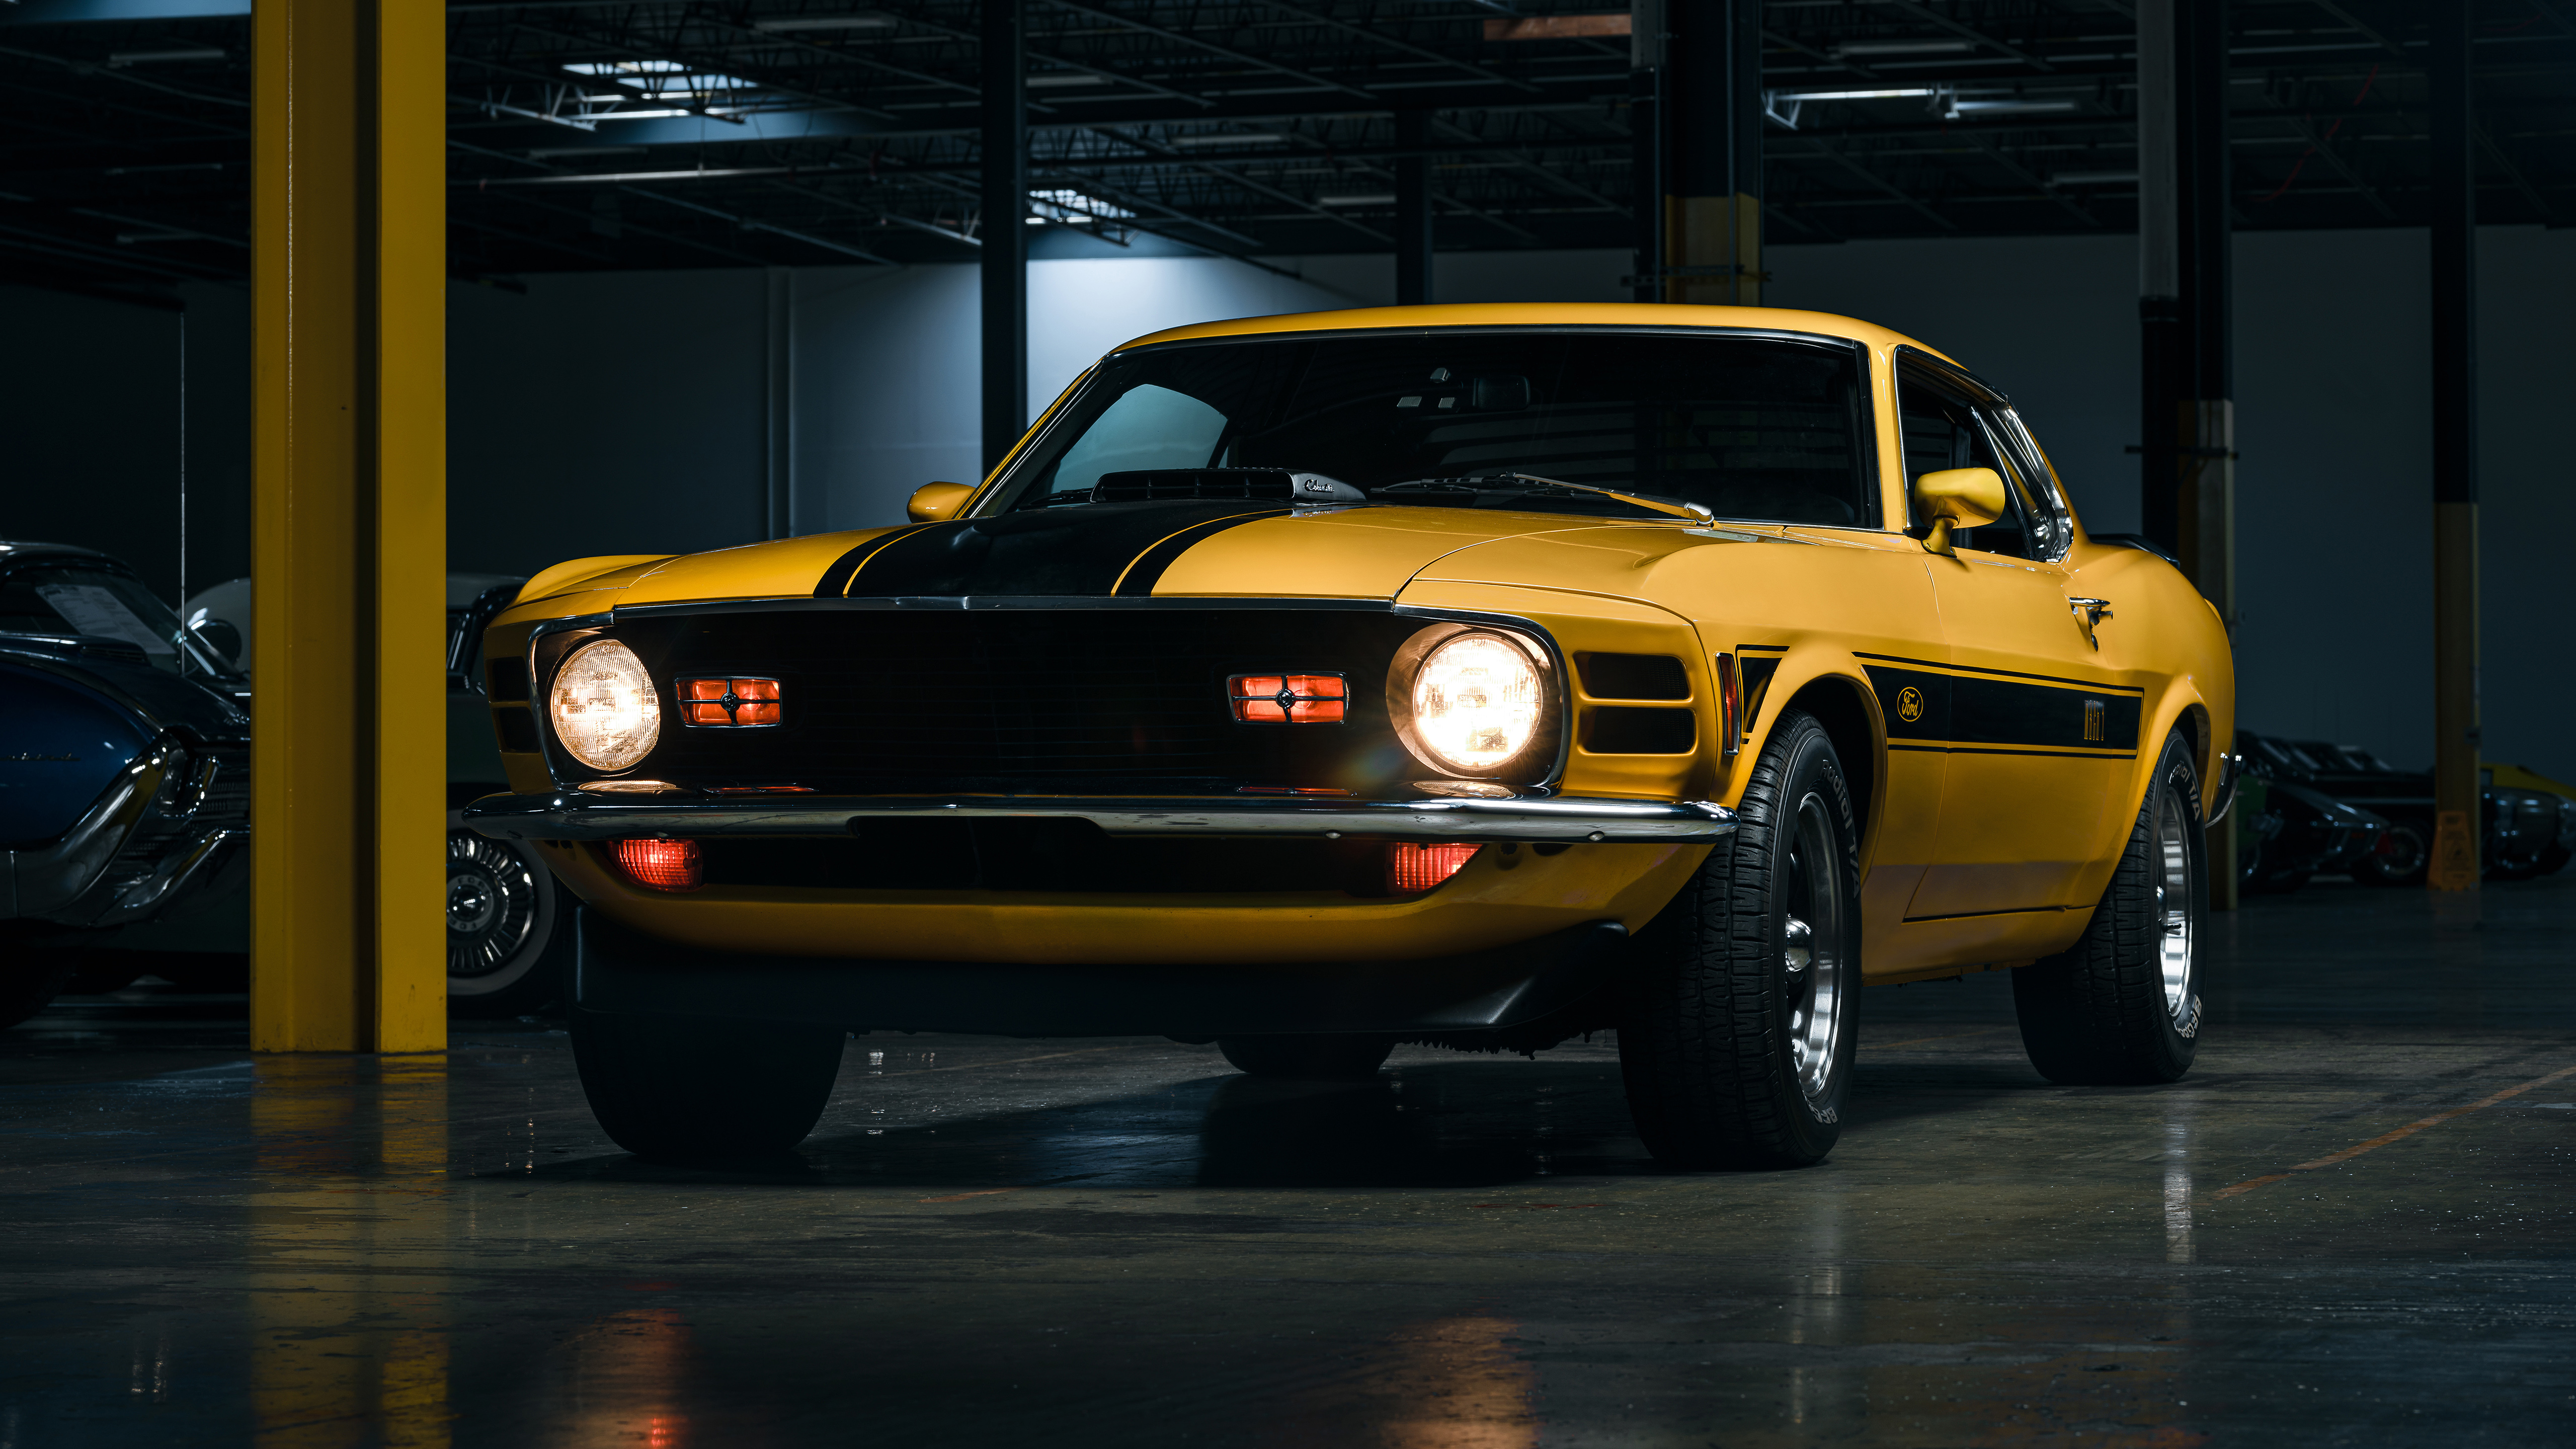 General 5120x2880 Ford Mustang Mach 1 Ford Mustang Ford car muscle cars yellow cars low light parking lot